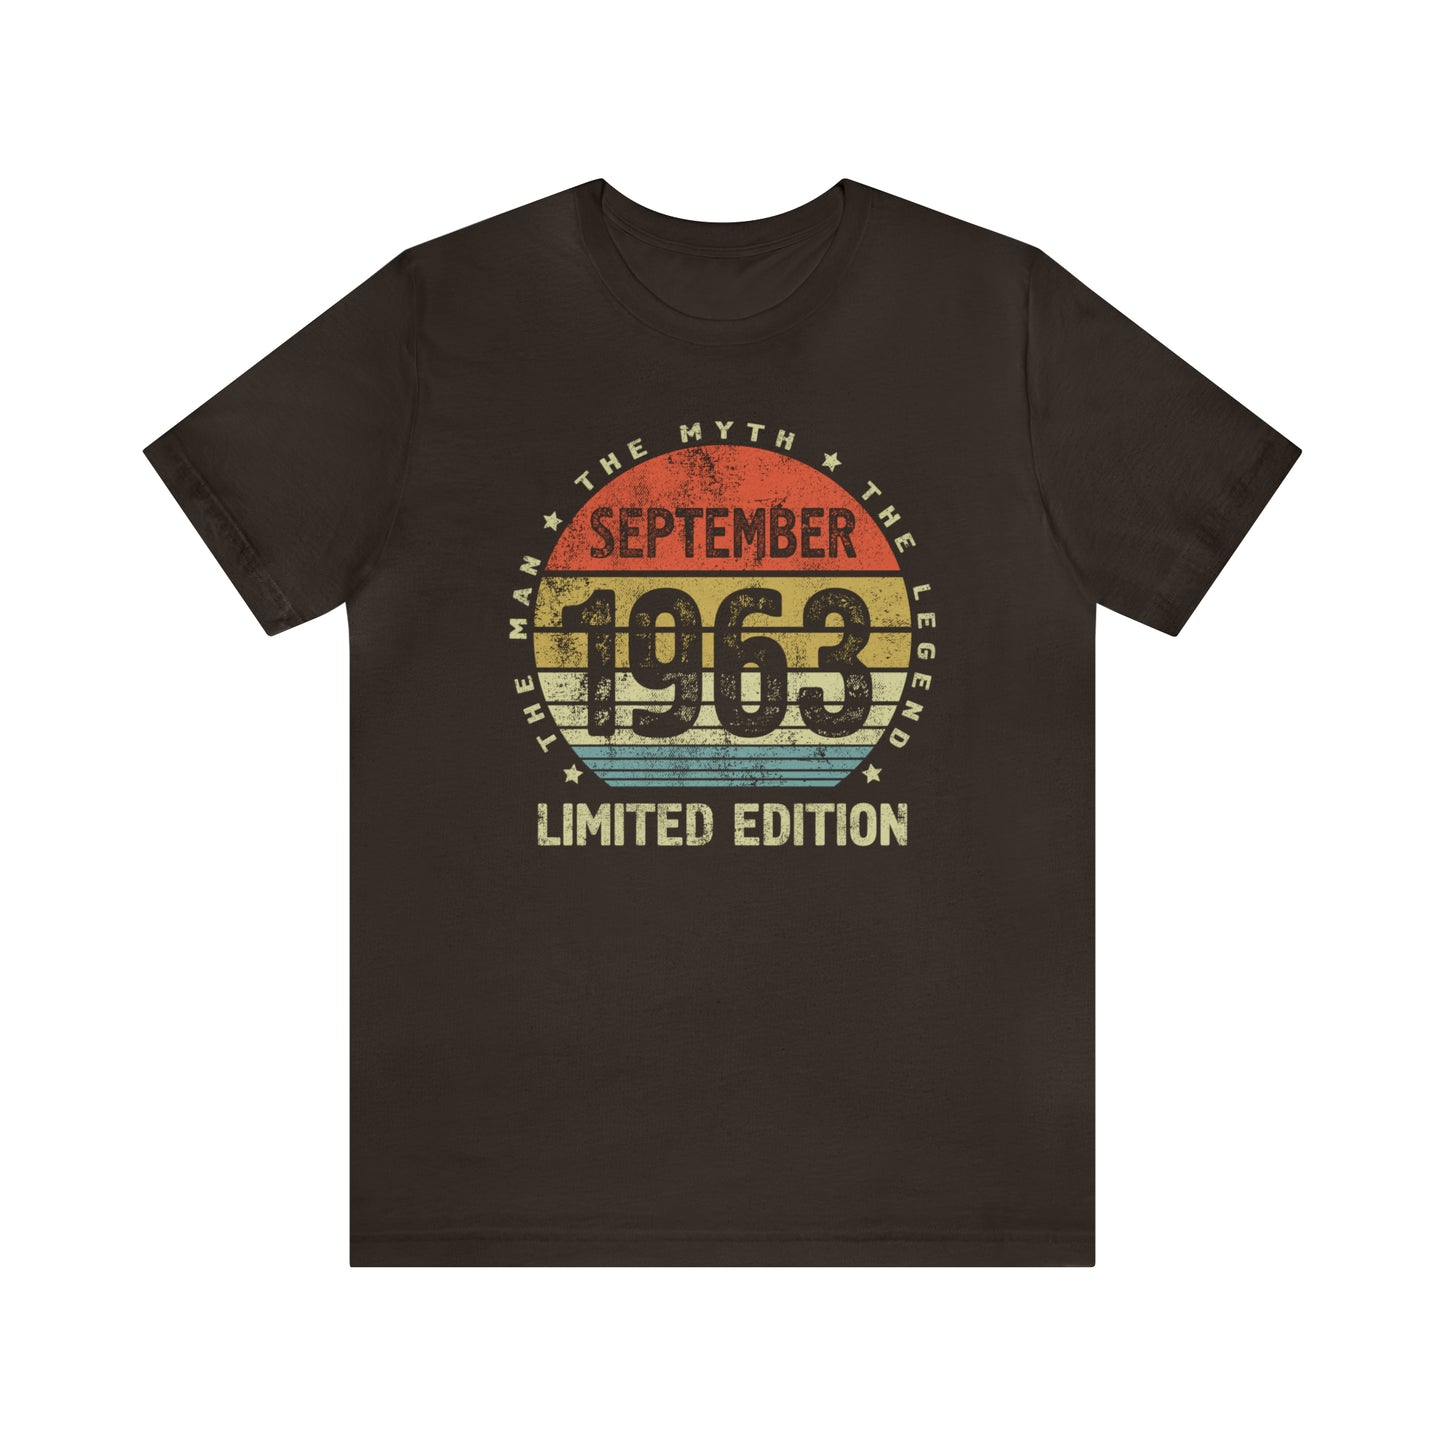 1963 birthday gift for men or dad, September shirt for father or brother The Man The Myth The Legend